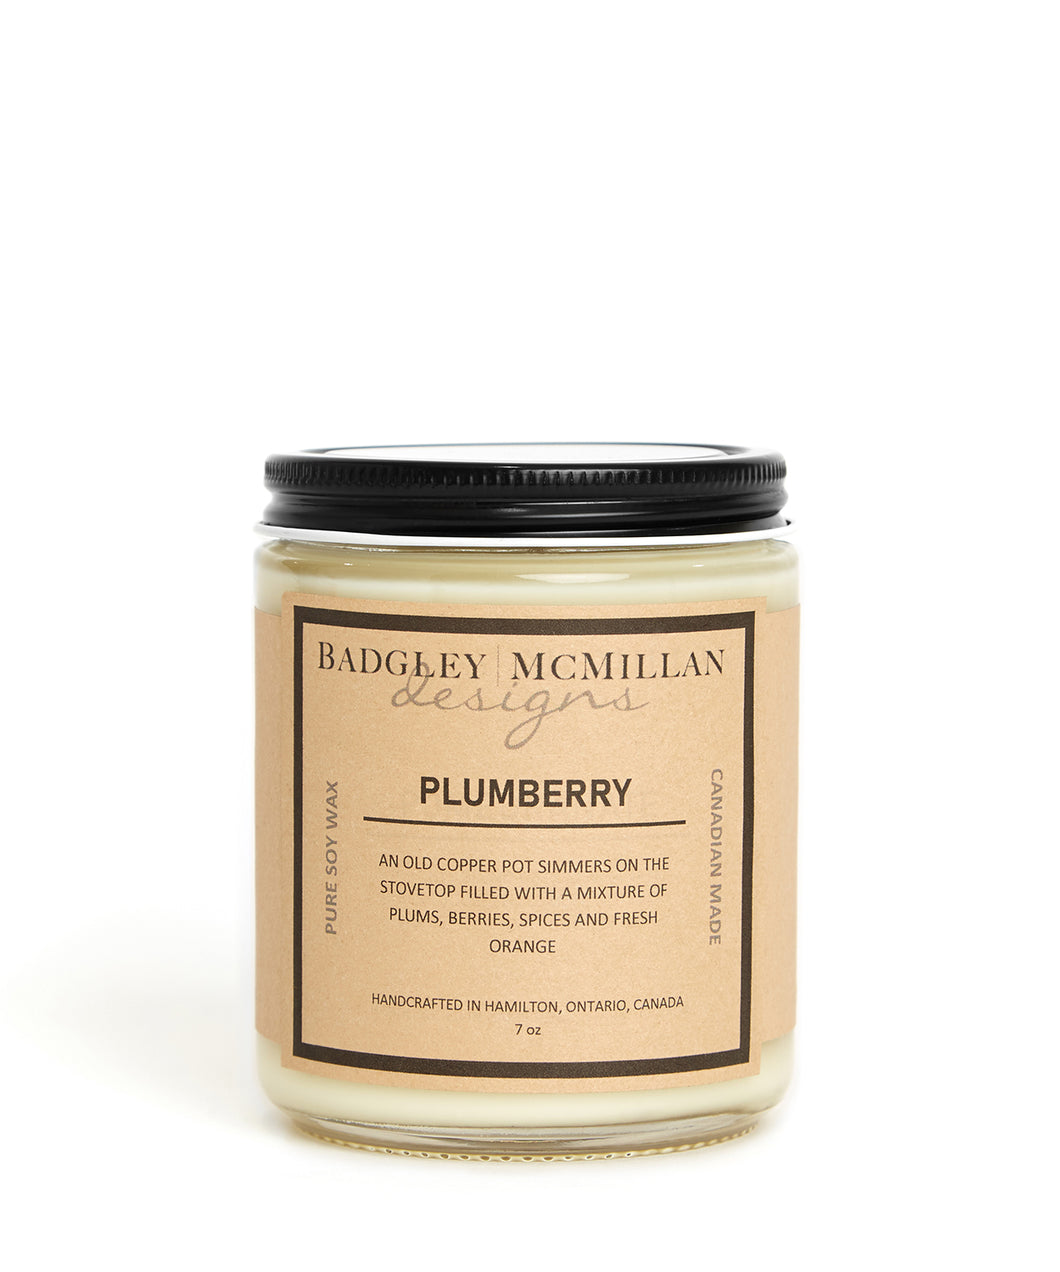 Plumberry 7 oz Soy Jar Candle